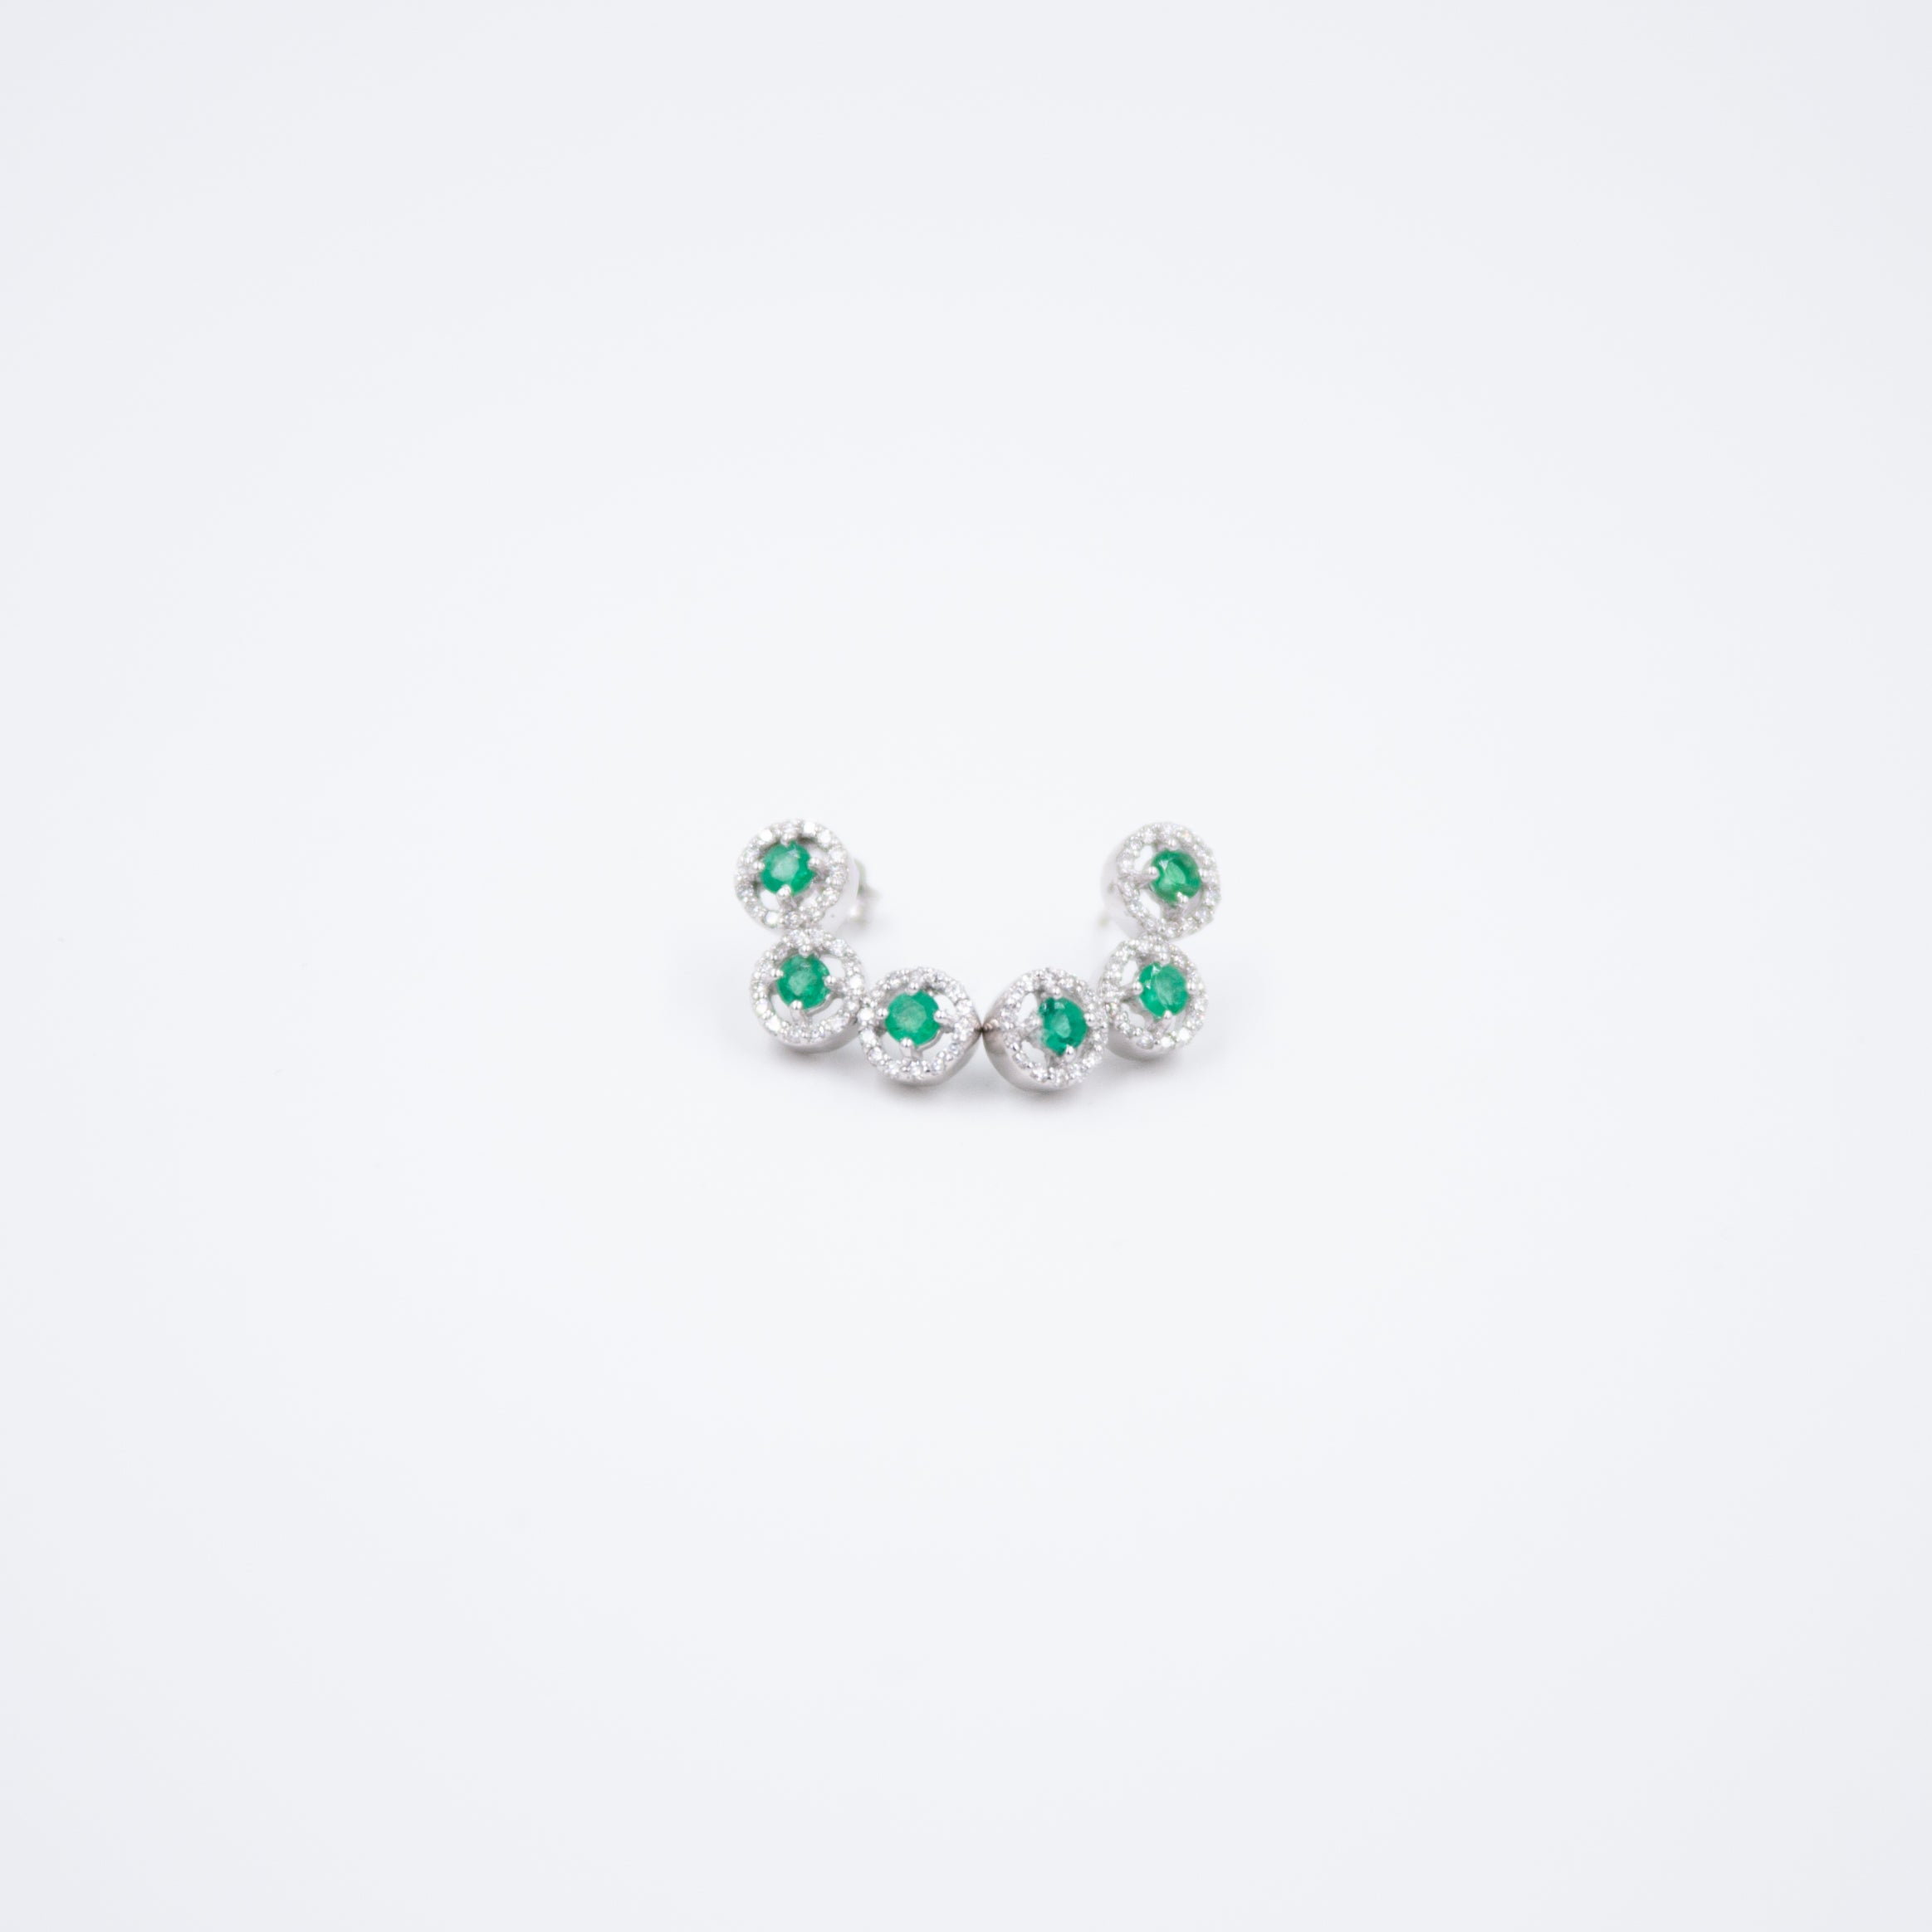 Trio earrings with Emeralds and Diamonds